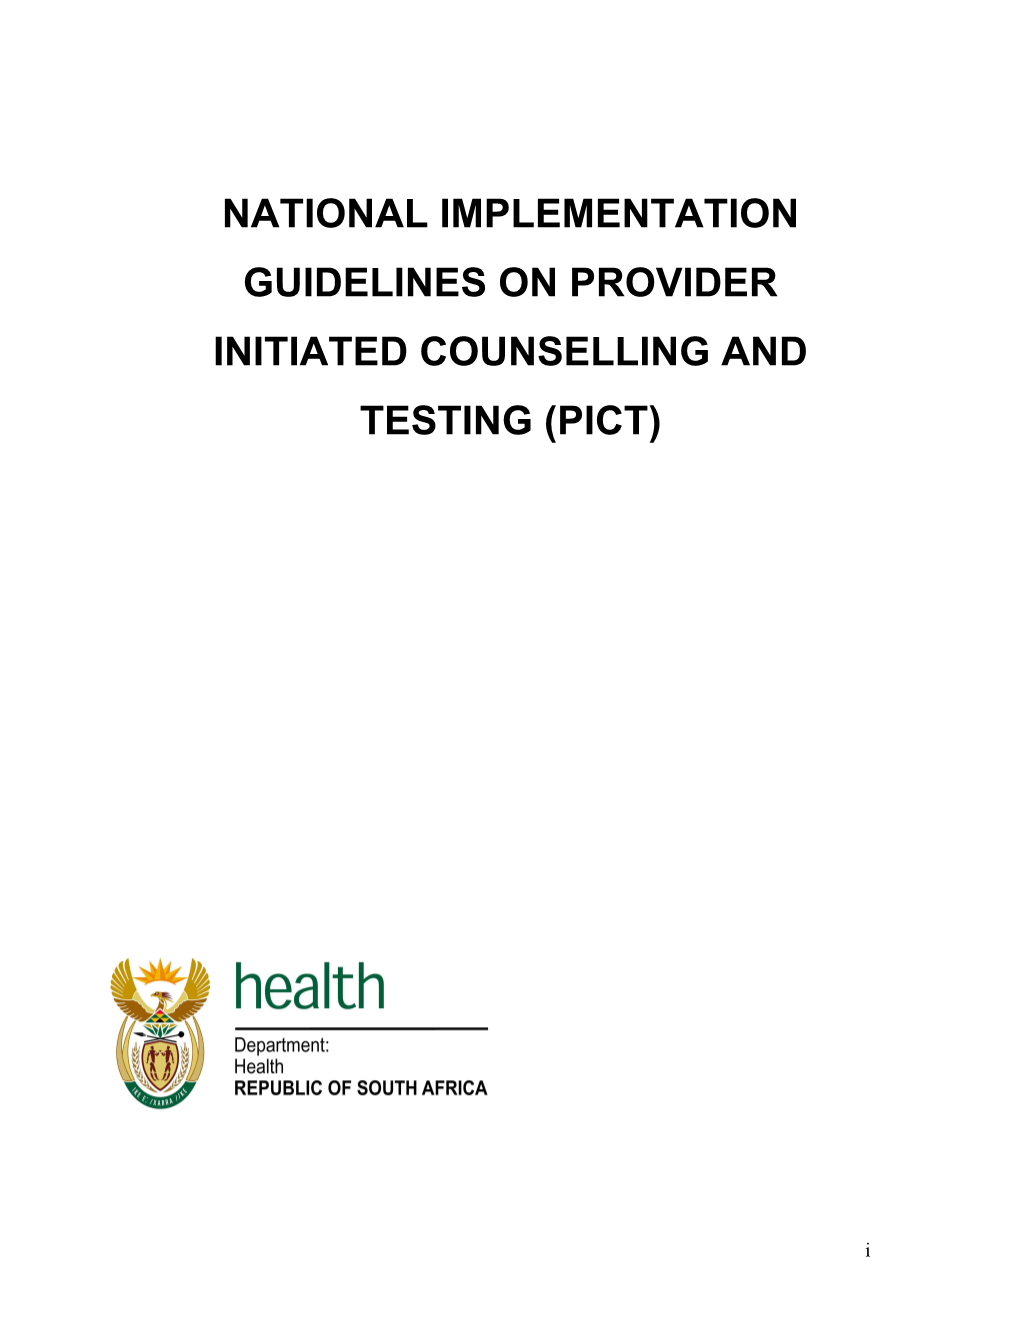 National Implementation Guidelines on Provider Initiated Counselling and Testing (Pict)